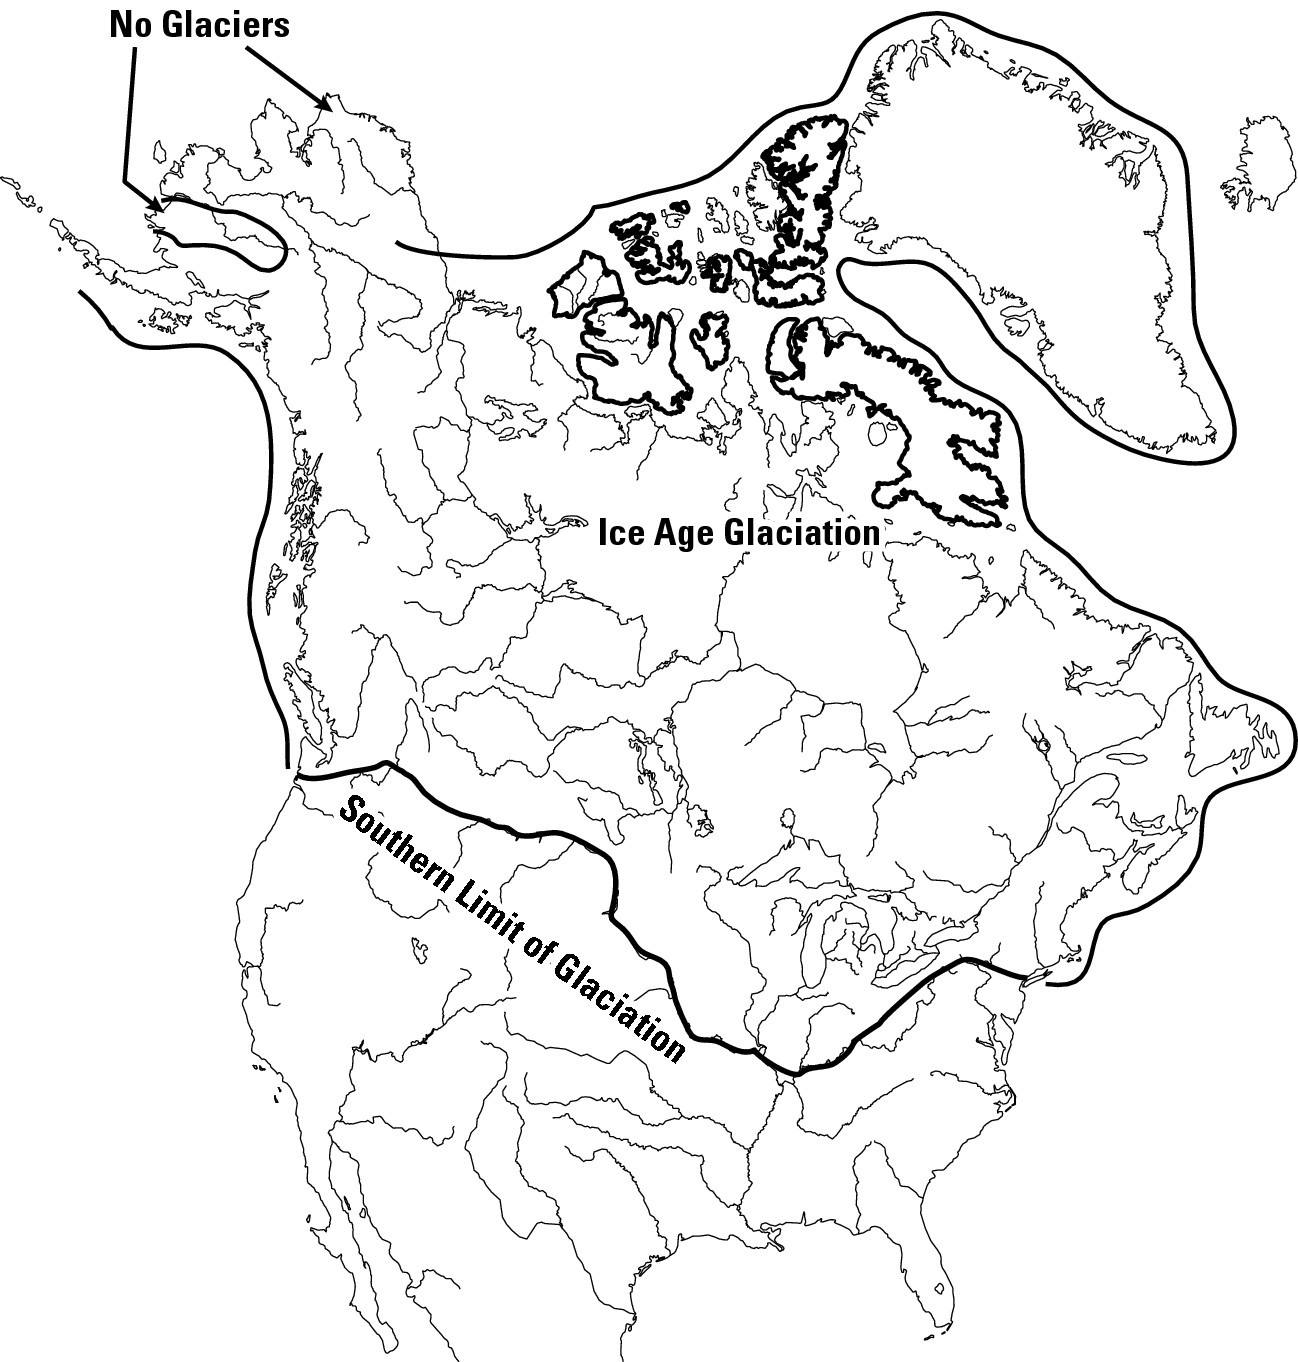 Figure 7-7: Extent of continental glaciers in North America during the last Ice Age.